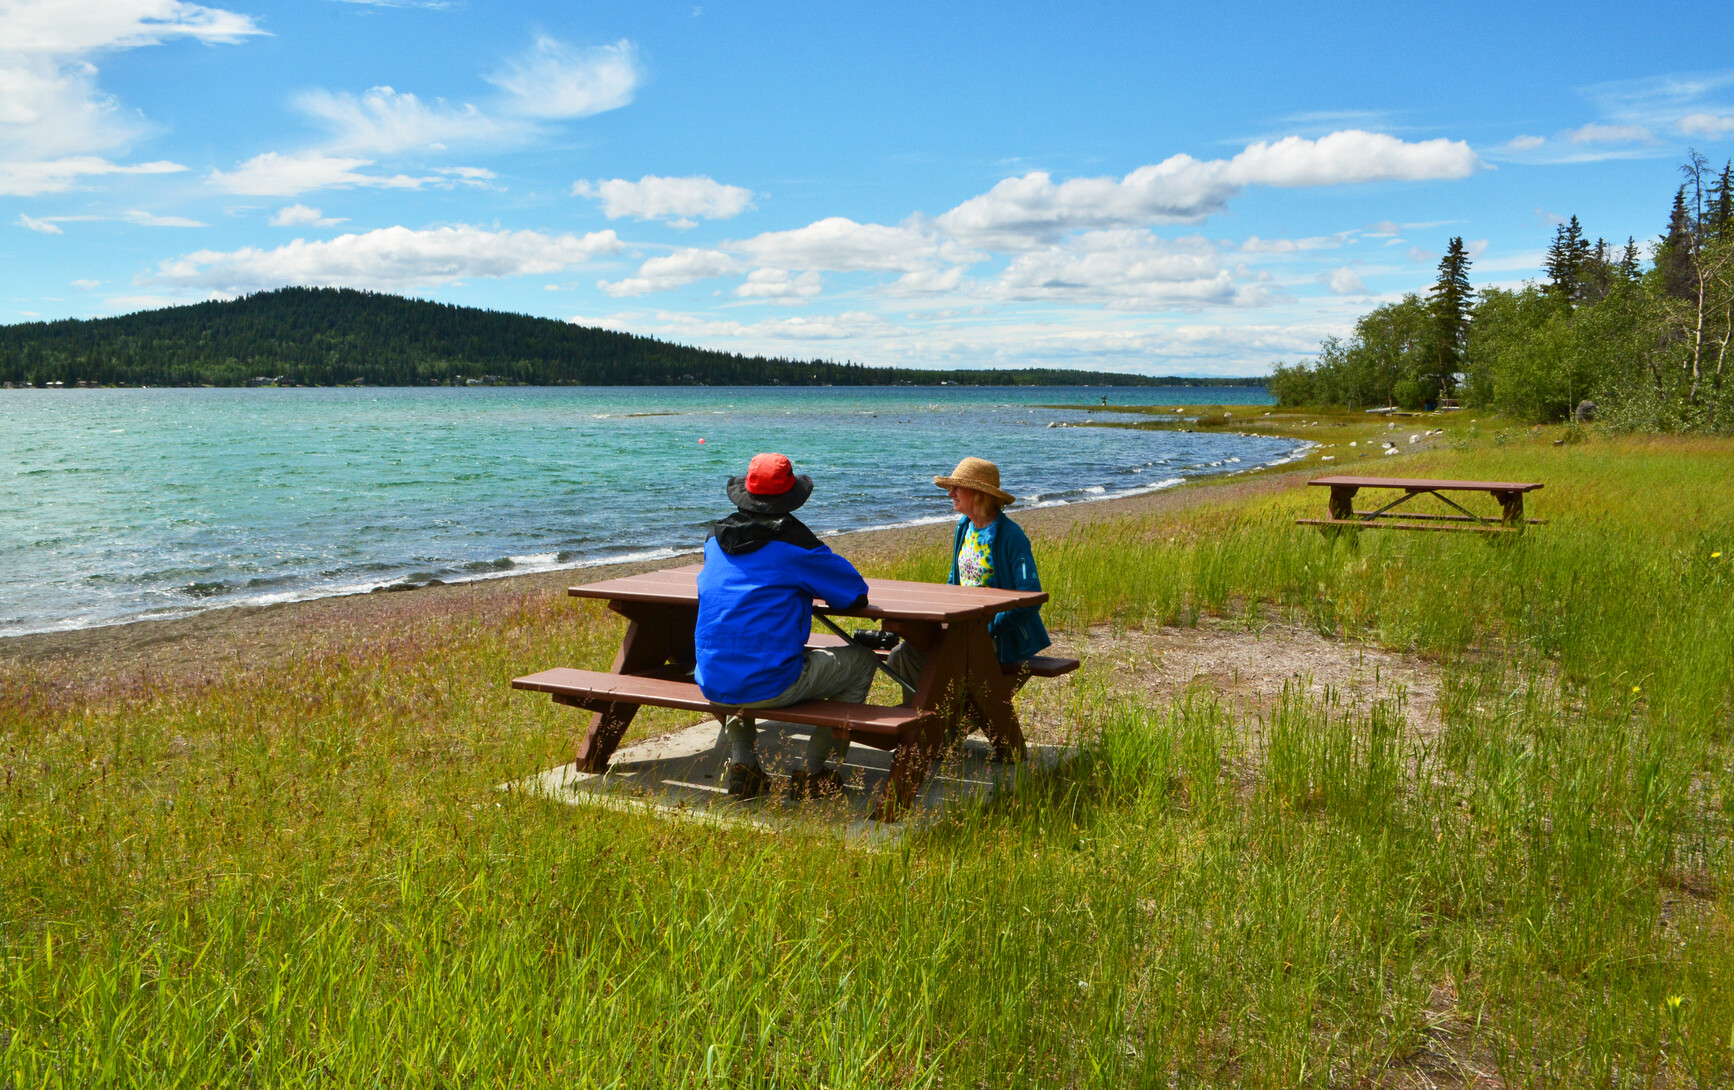 Little Arrowhead Site. Park visitors sitting at a picnic table looking out a view of lake and forest on the other side.